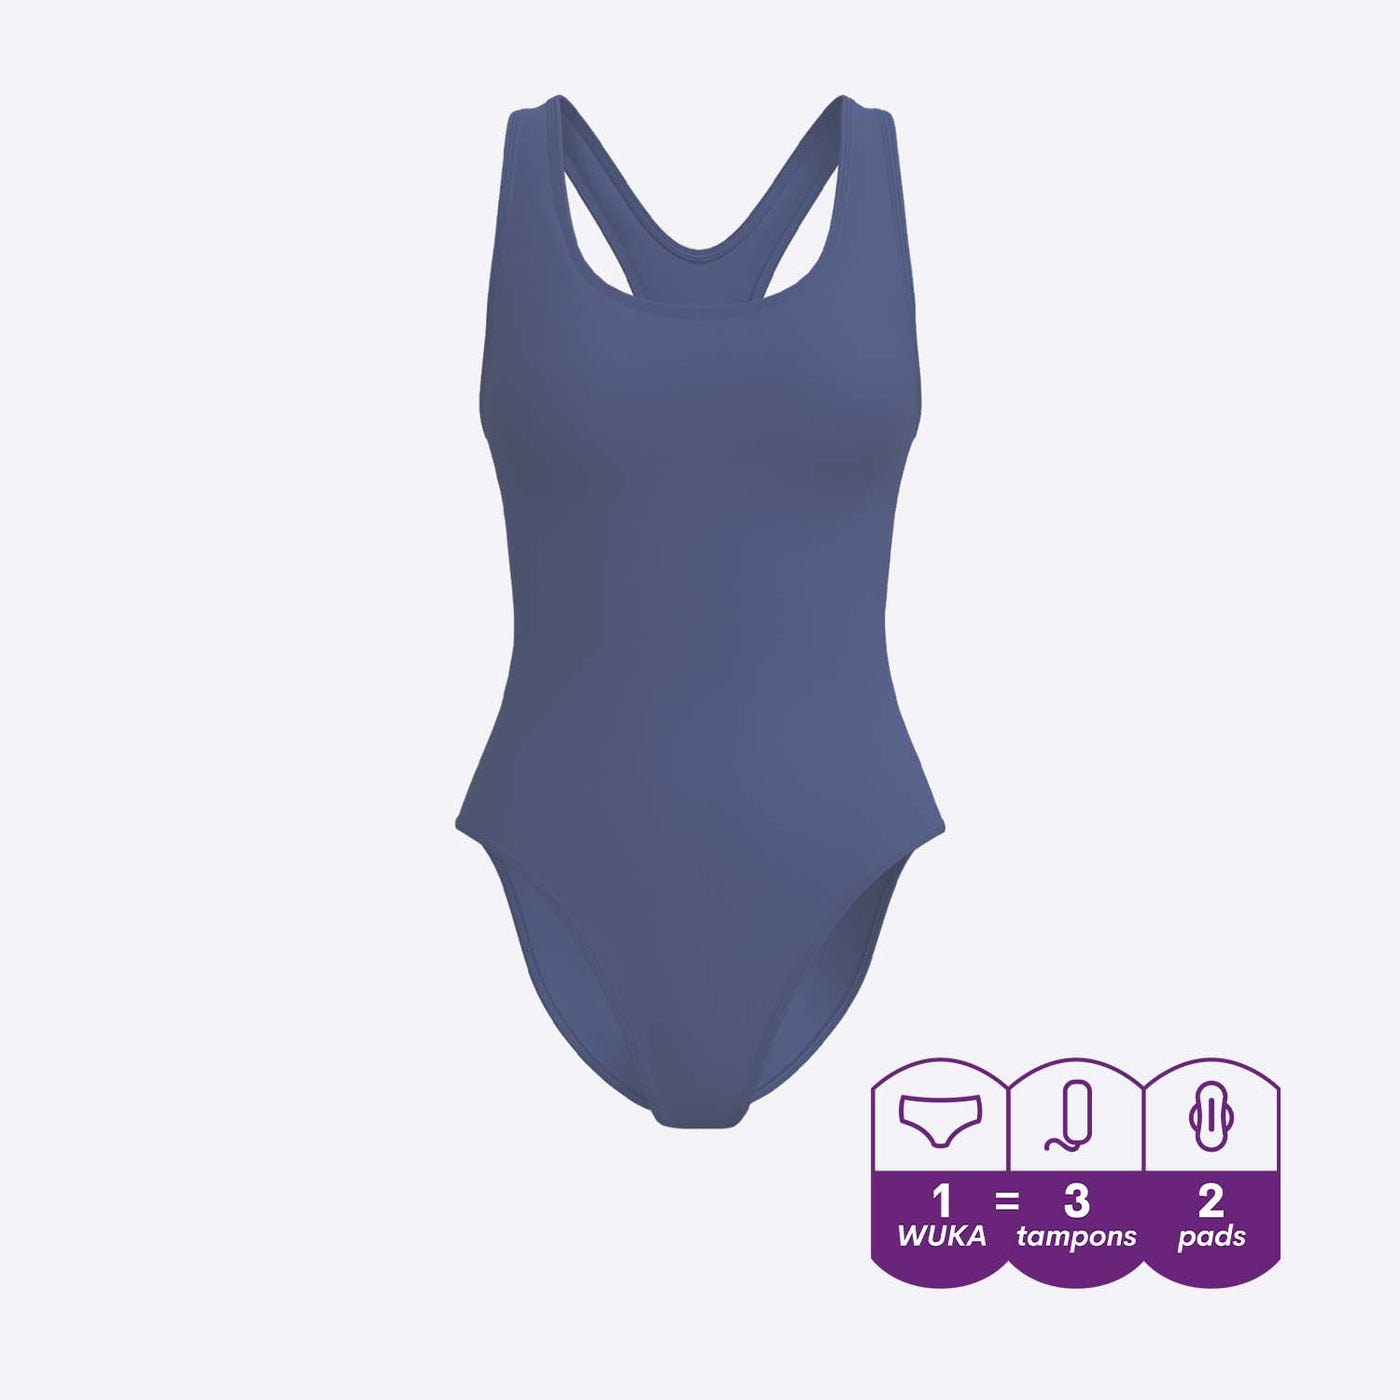 WUKA Period Racerback Swimsuit Style Light to Medium Absorbency Light Blue Colour Front 3D Render